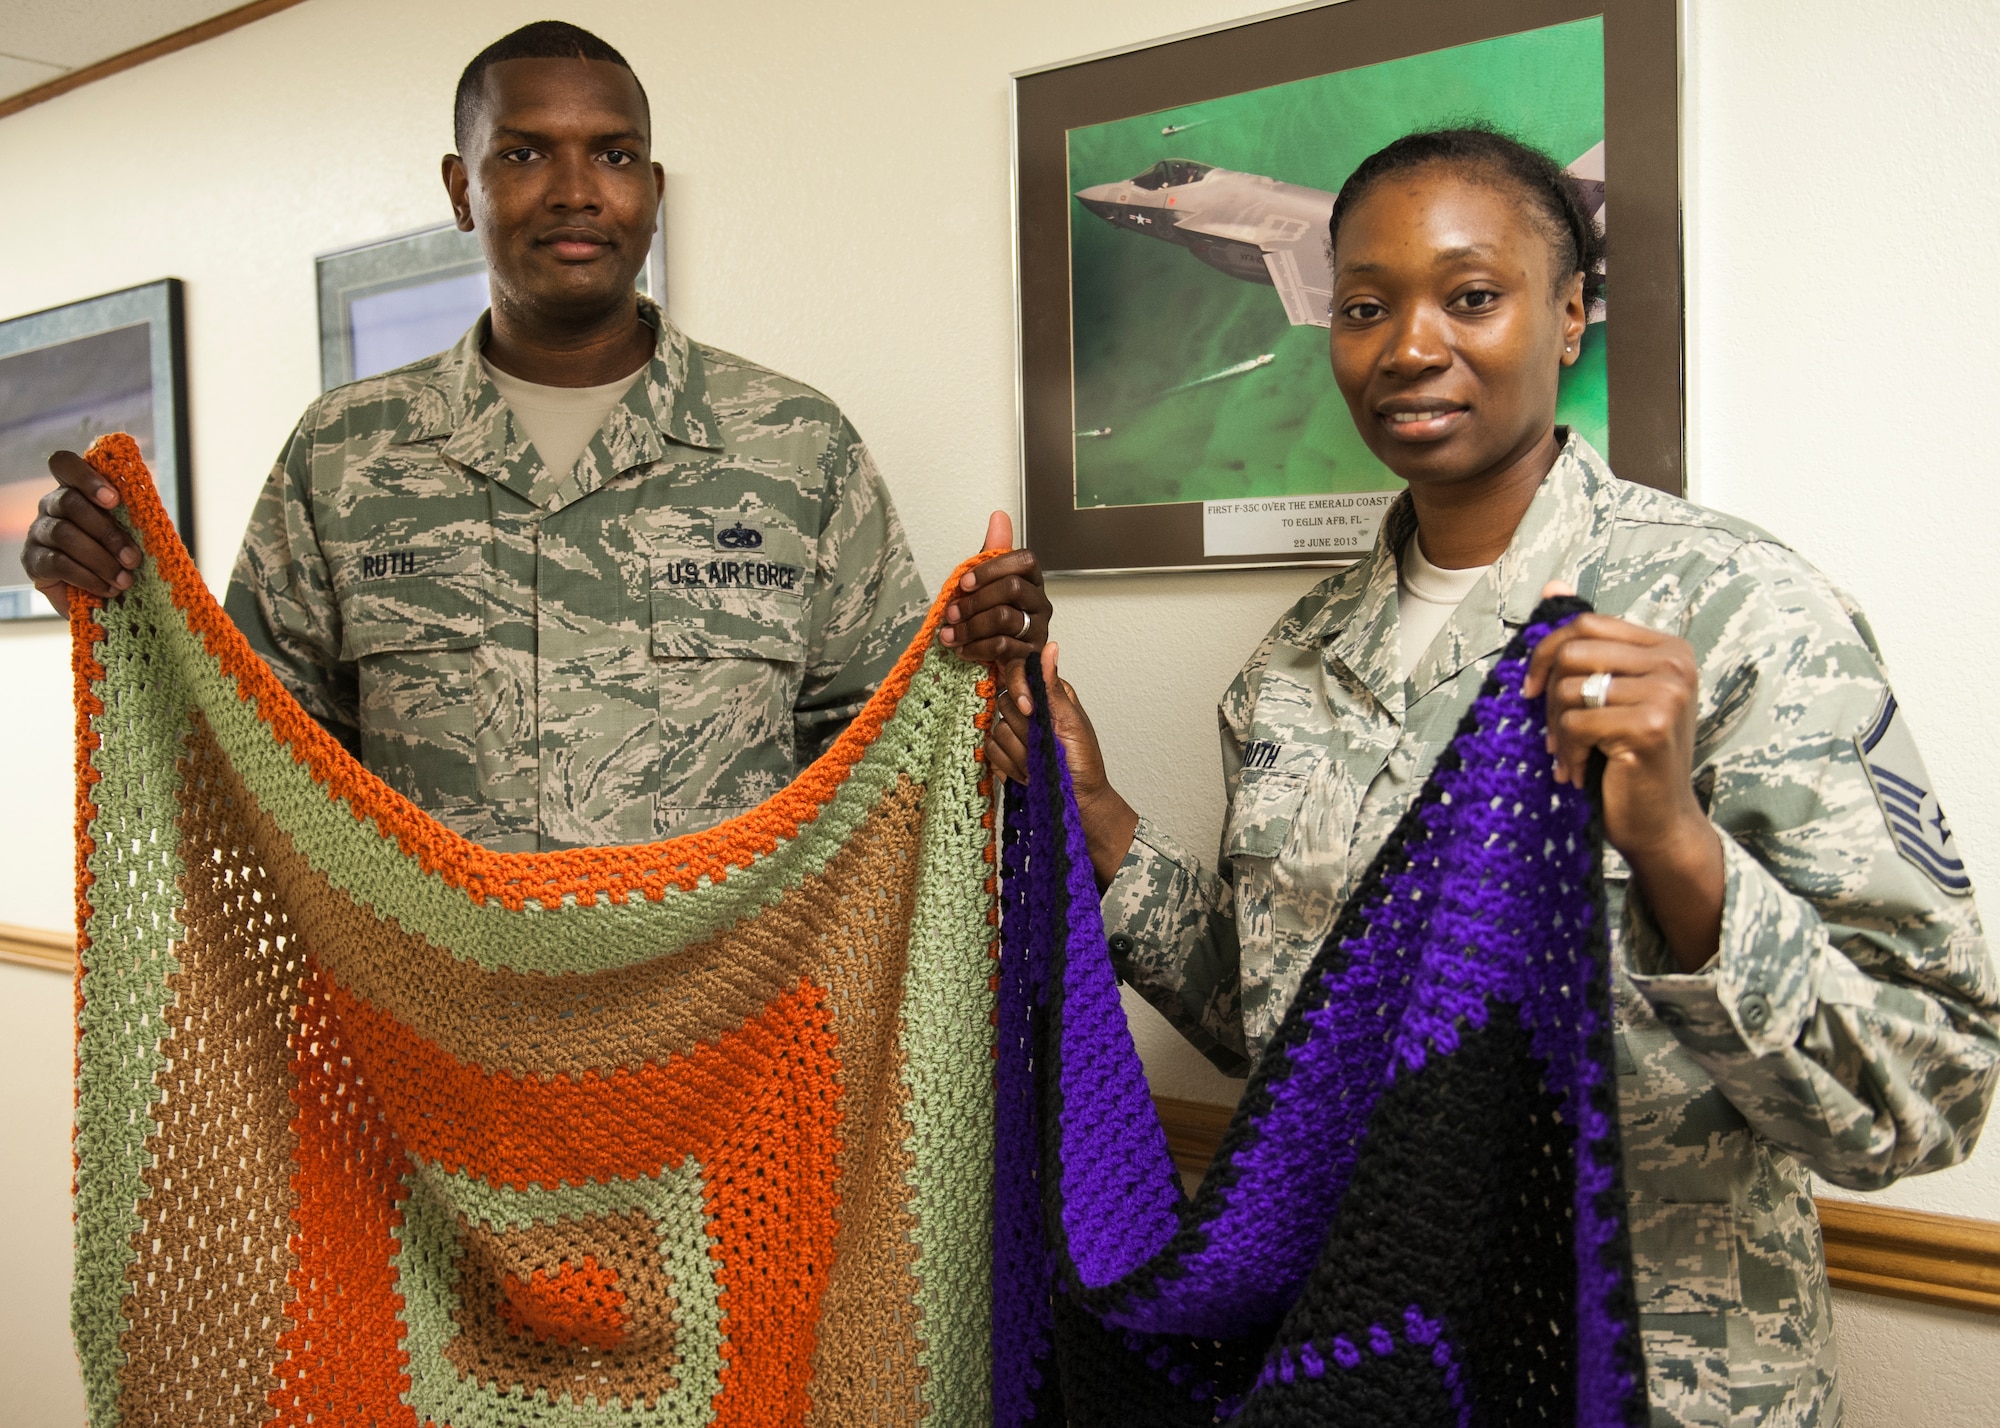 Tech. Sgt. Antonio Ruth, 33rd Fighter Wing and his wife, Master Sgt. Candace Ruth, 53rd Wing, display two blankets crocheted by Master Sgt. Ruth June 16 at Eglin Air Force Base, Fla. Ruth formed an organization to honor his late mother, and to continue her legacy of caring and giving.  A “Tiny” Bit of Love provides handmade blankets to cancer patients. (U.S. Air Force photo/Ilka Cole)